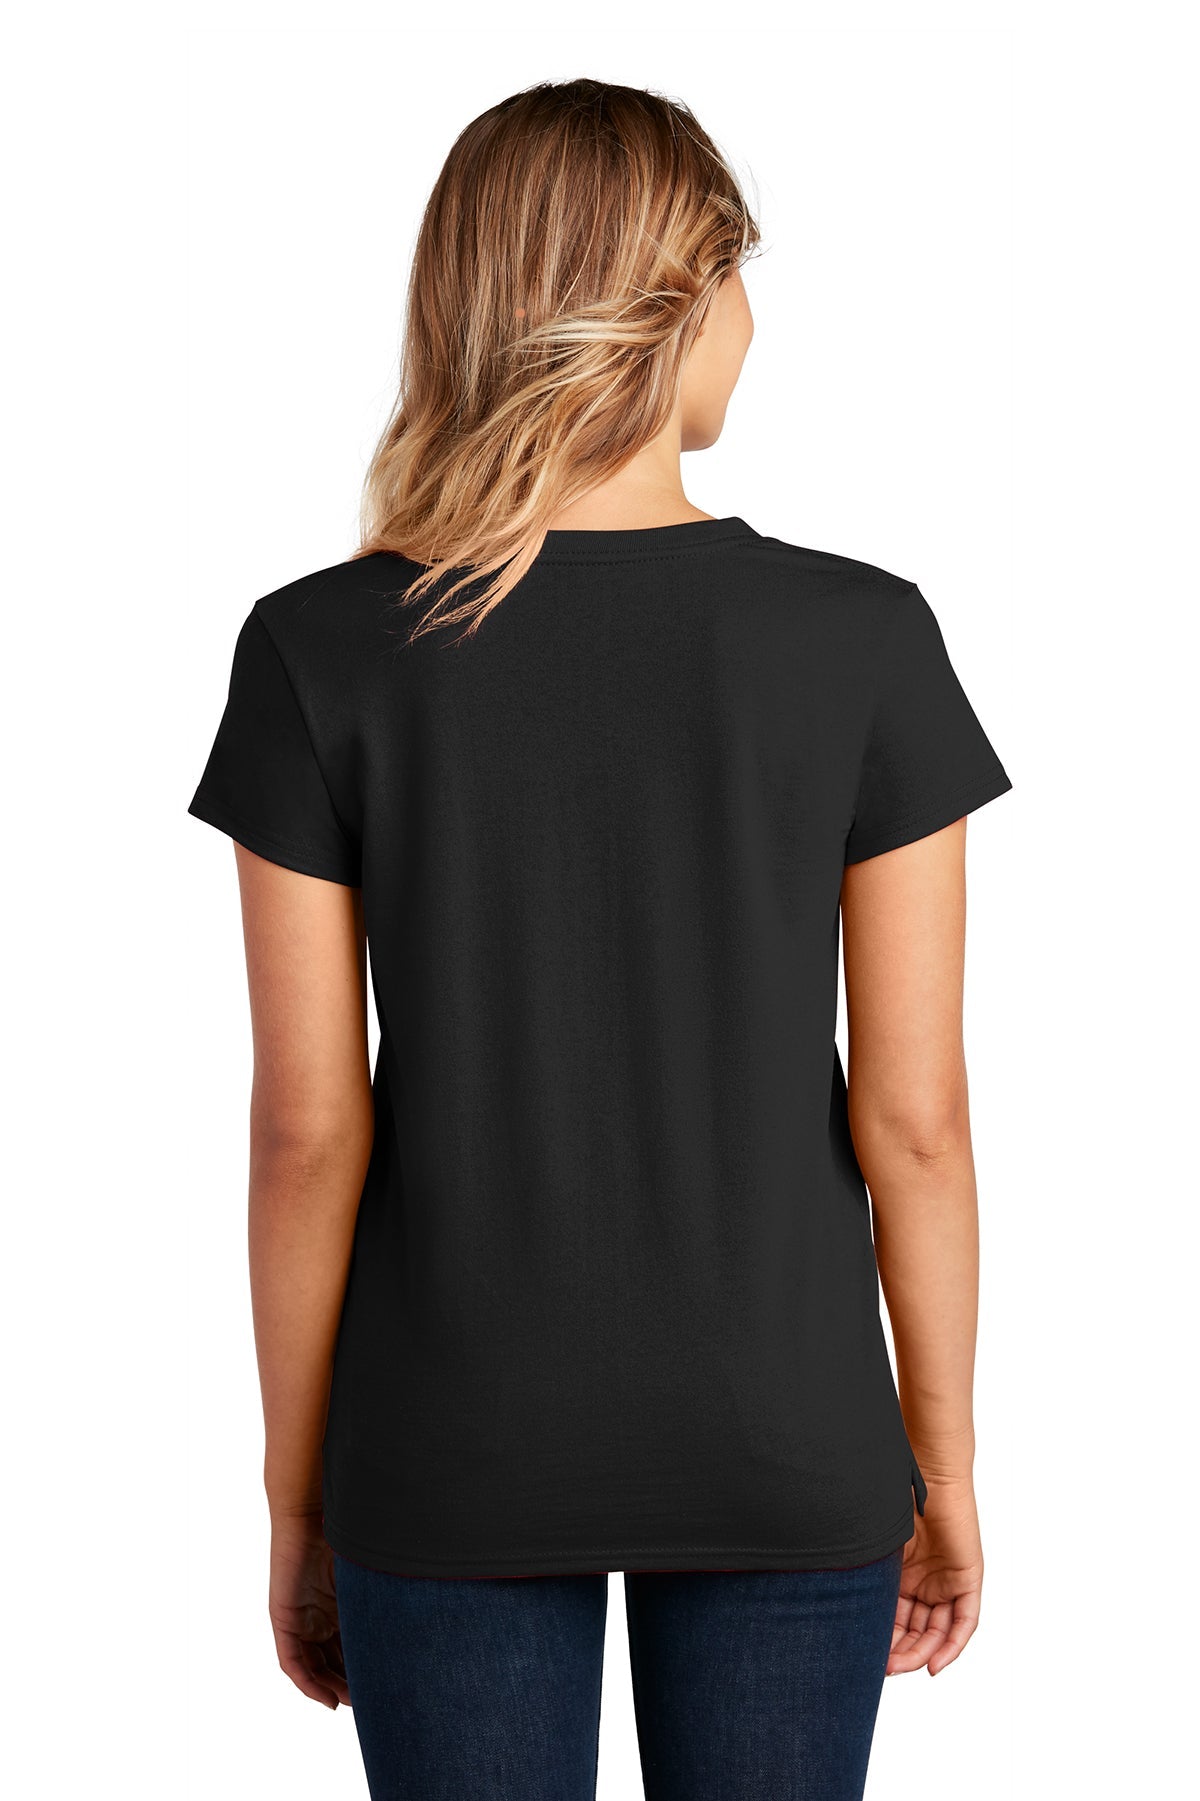 District Womens V-Neck Tee, Black [GuidePoint Security]